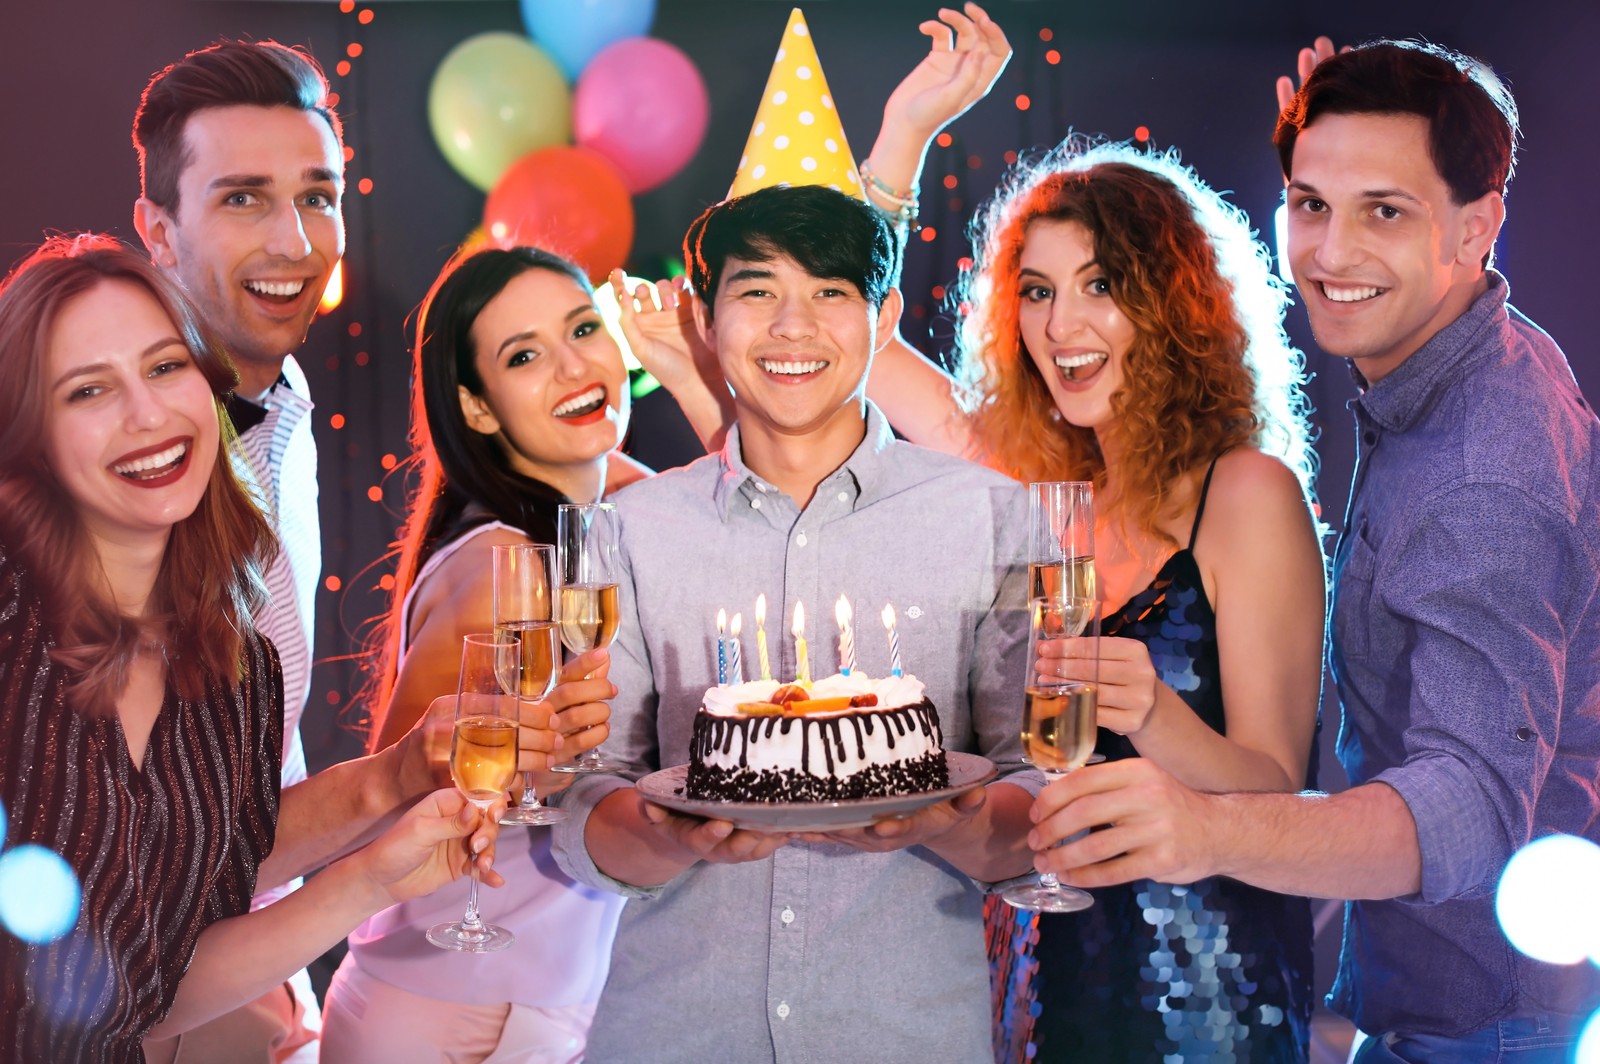 Photo of young people celebrating birthday with cake in nightclub